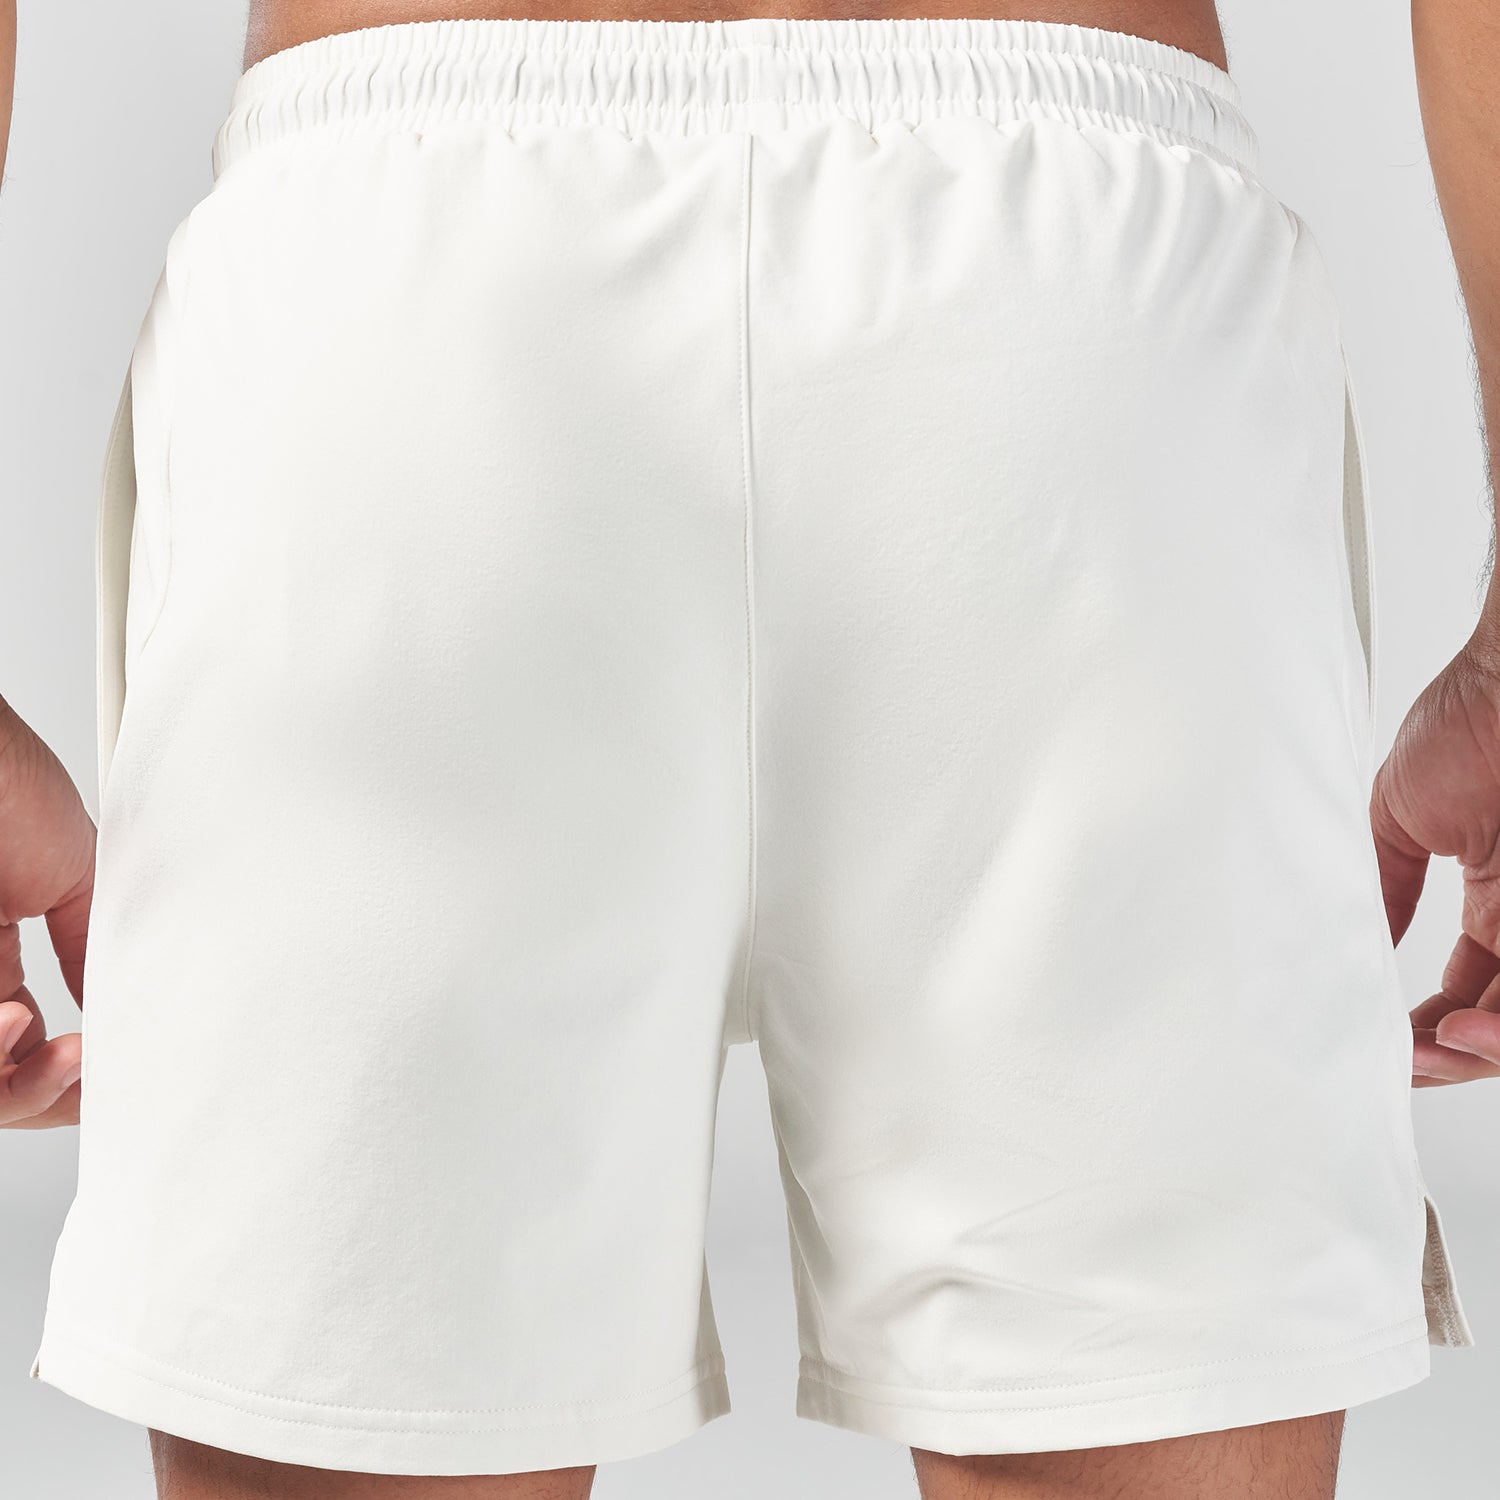 squatwolf-gym-wear-essential-5-inch-shorts-pearl-white-workout-short-for-men